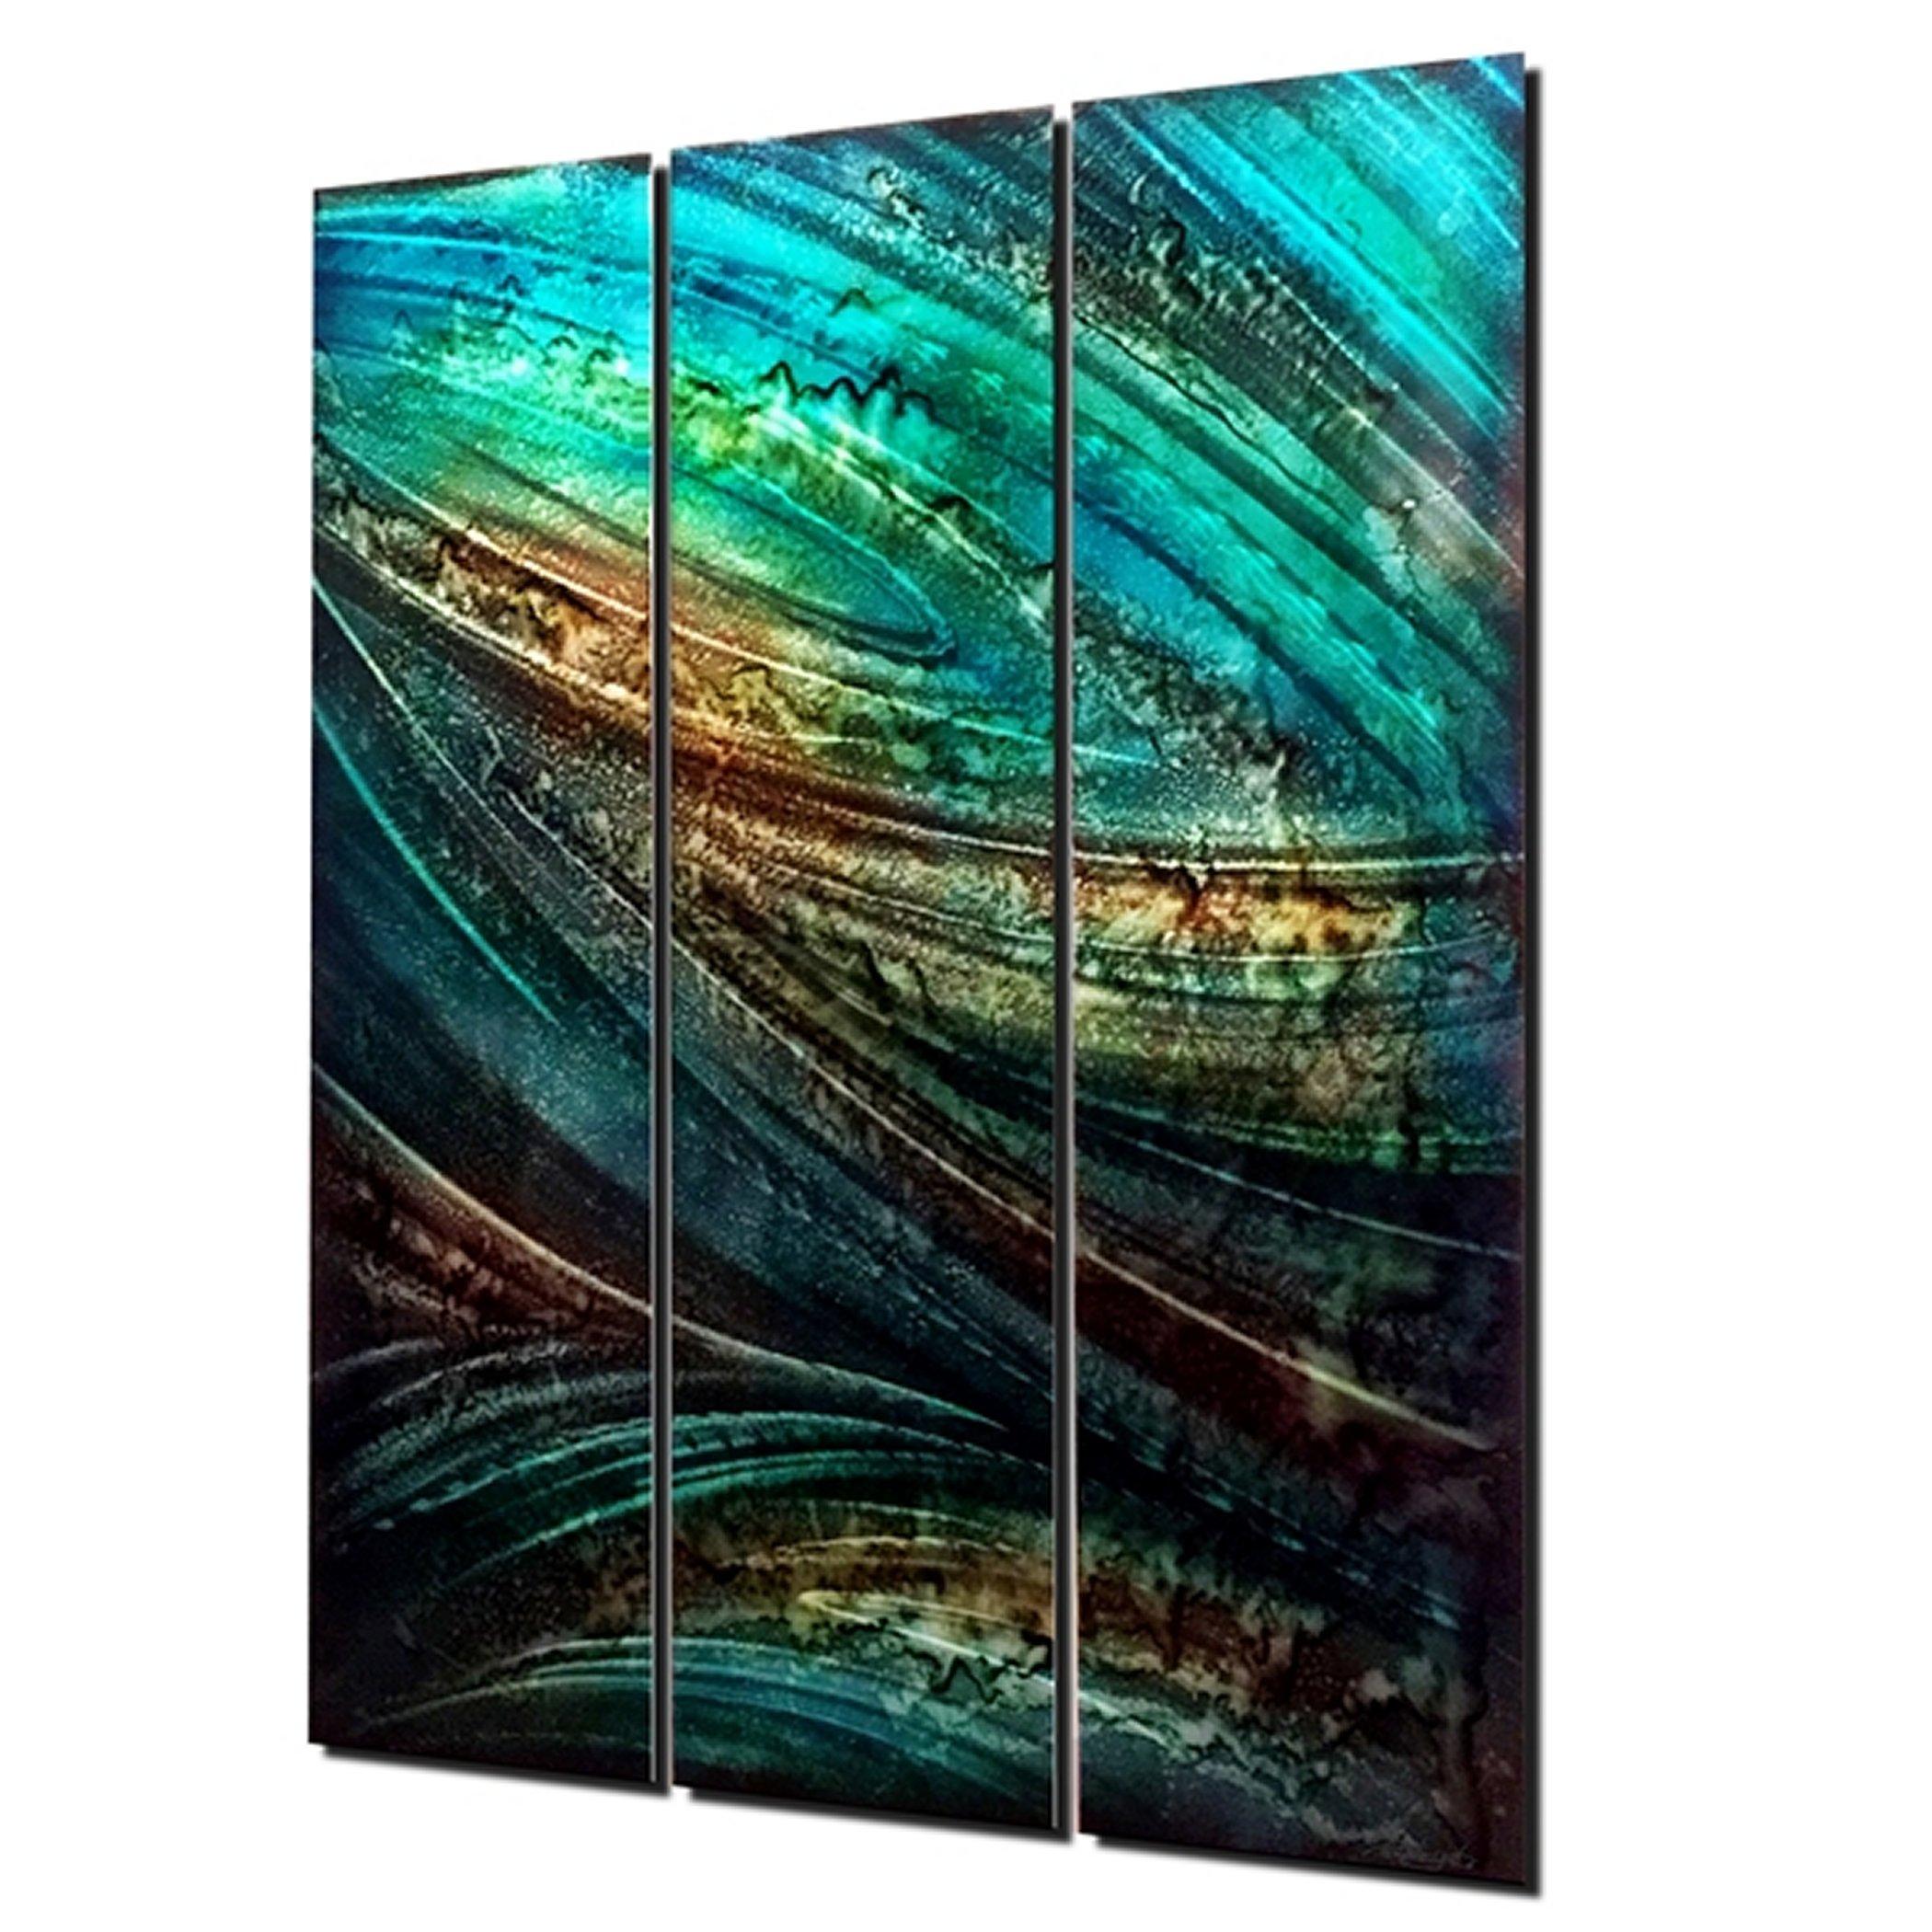 Large Original Abstract Modern Metal Wall Art Painting Industrial Contemporary